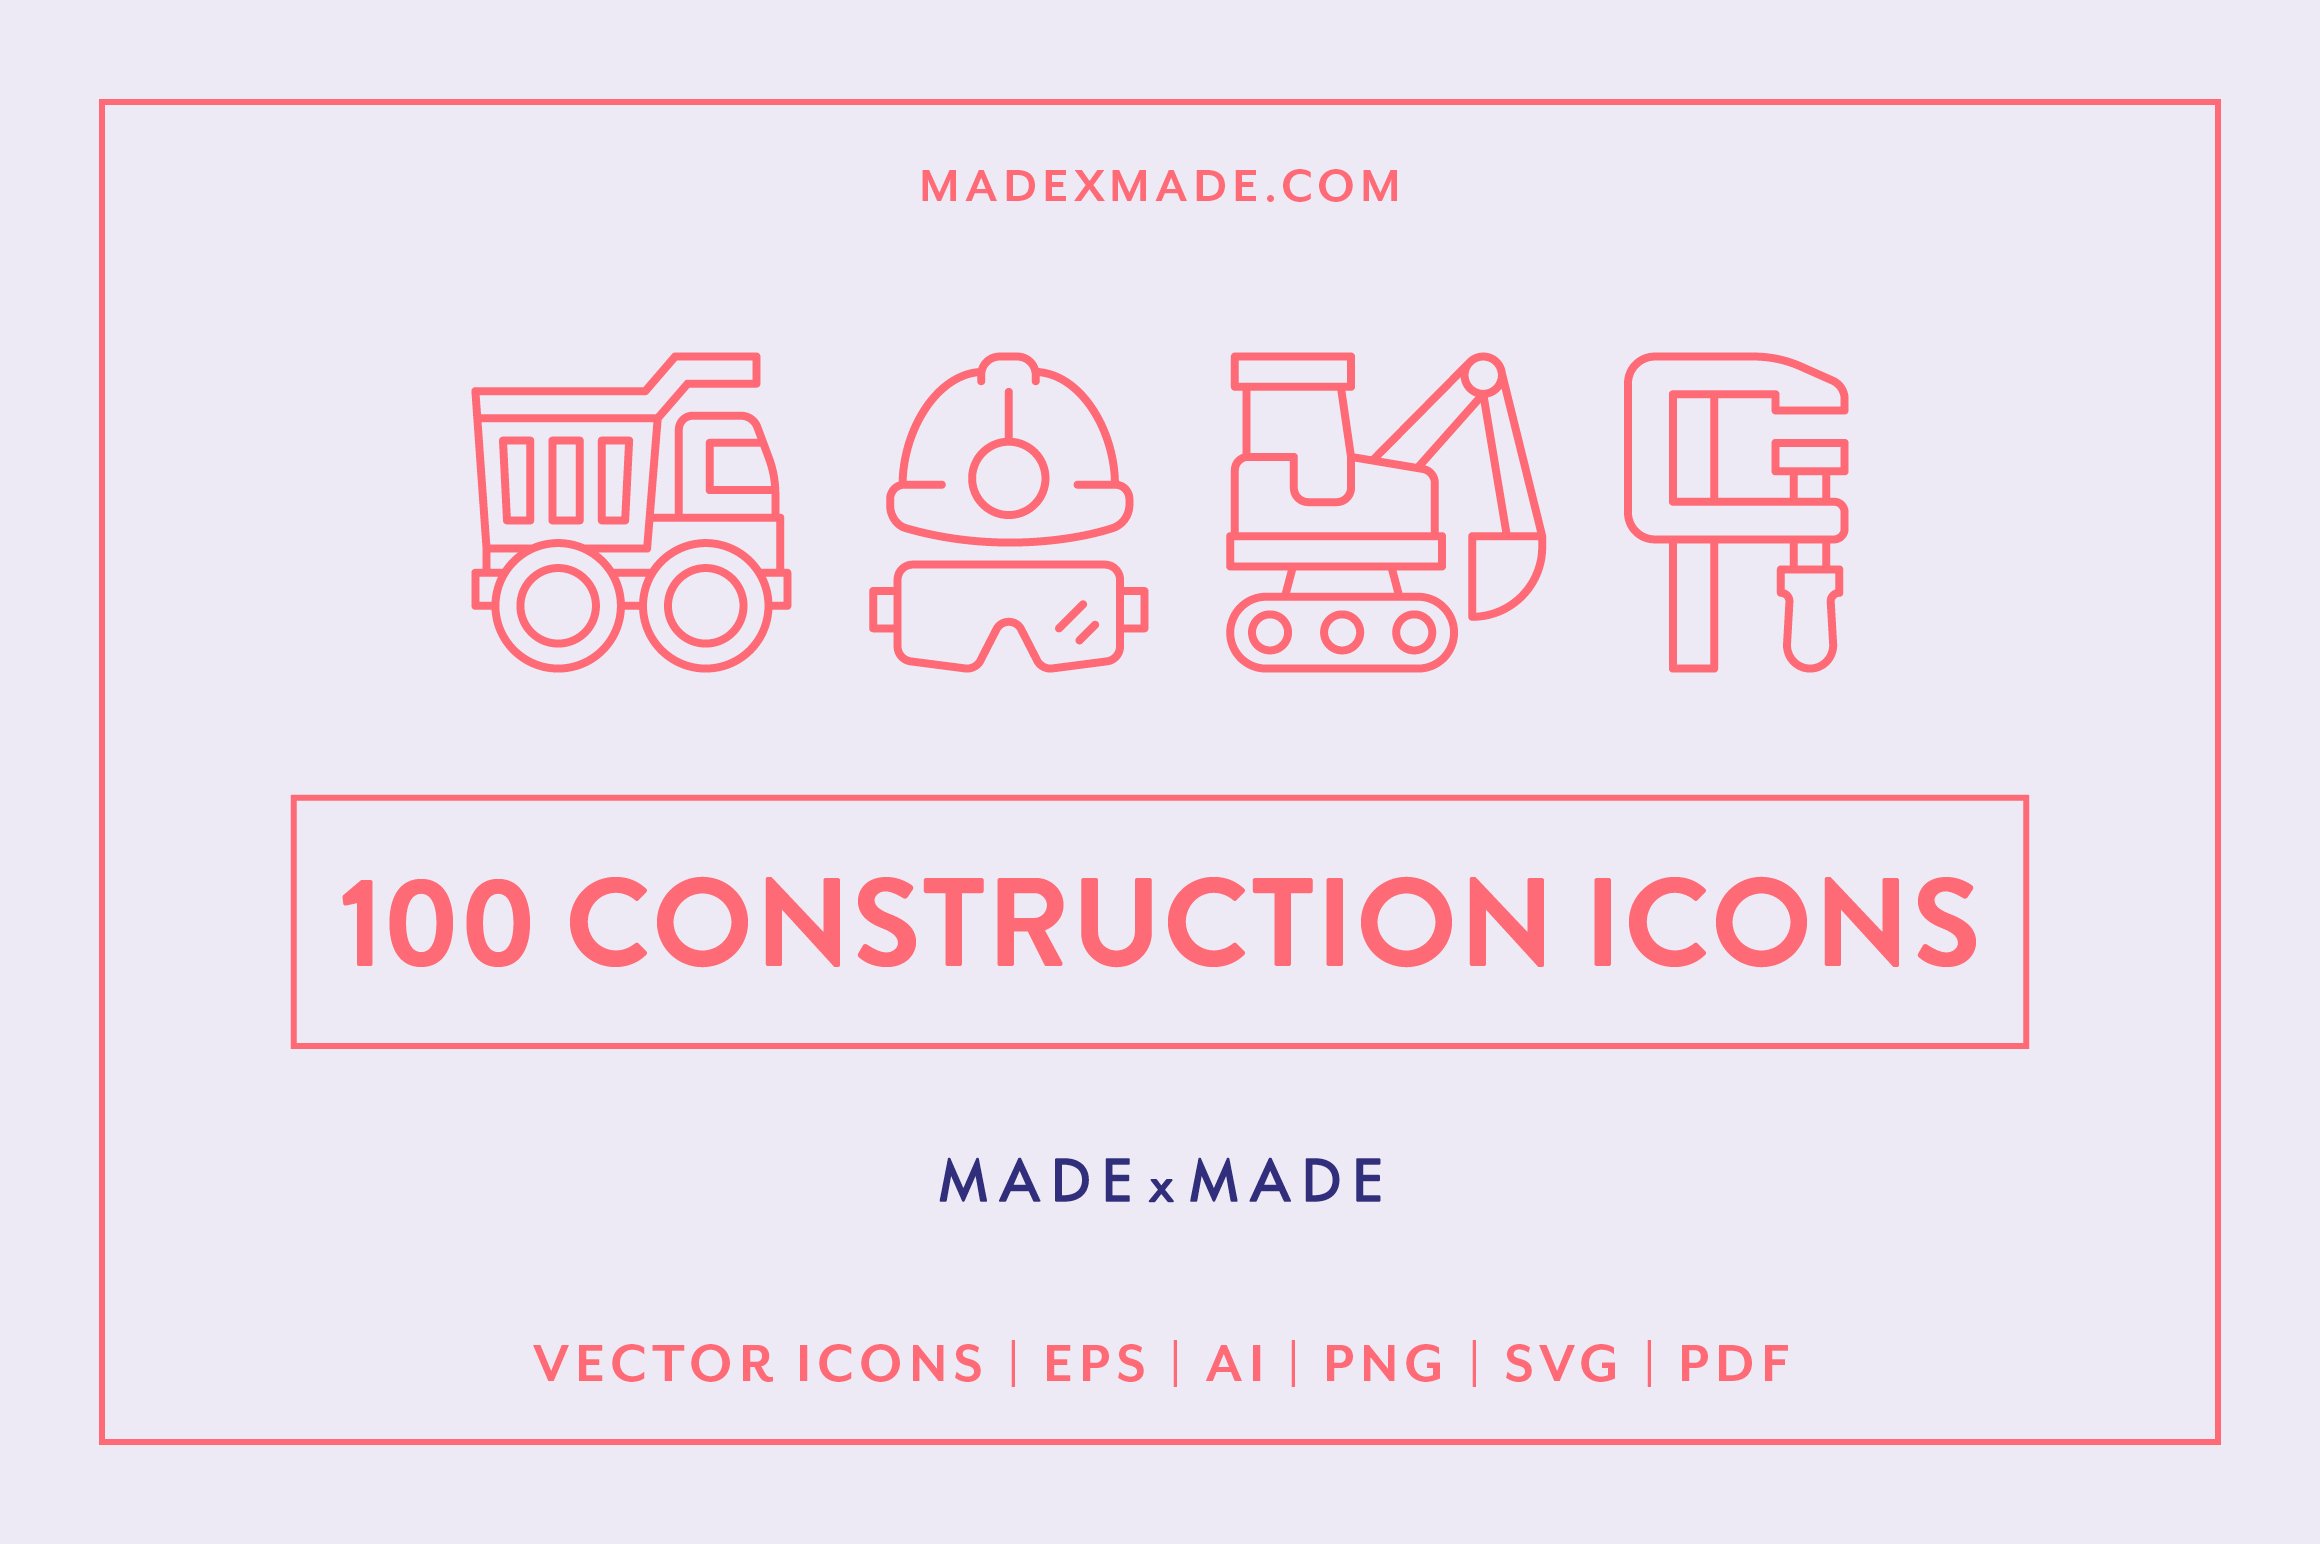 Construction Line Icons cover image.